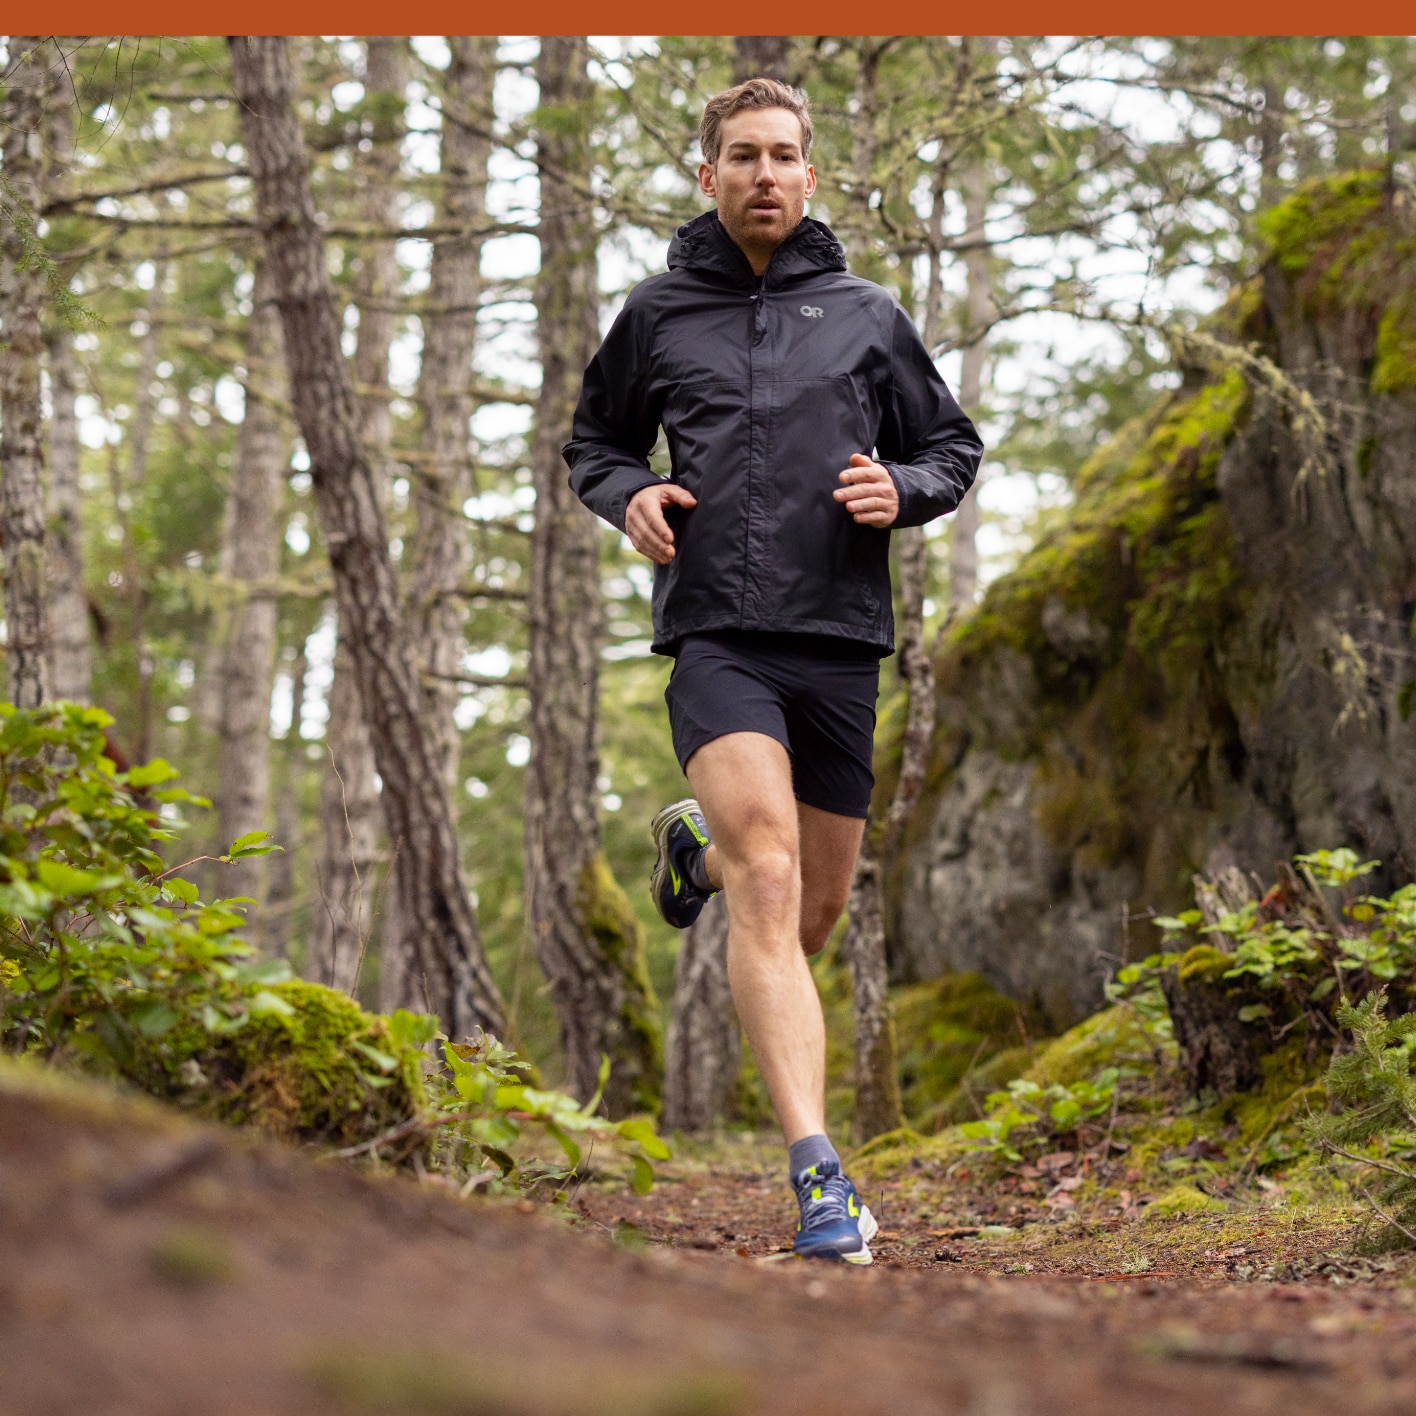 Trail Running Gifts For Him. Blaze a new path with shoes, gear and more for the trails.